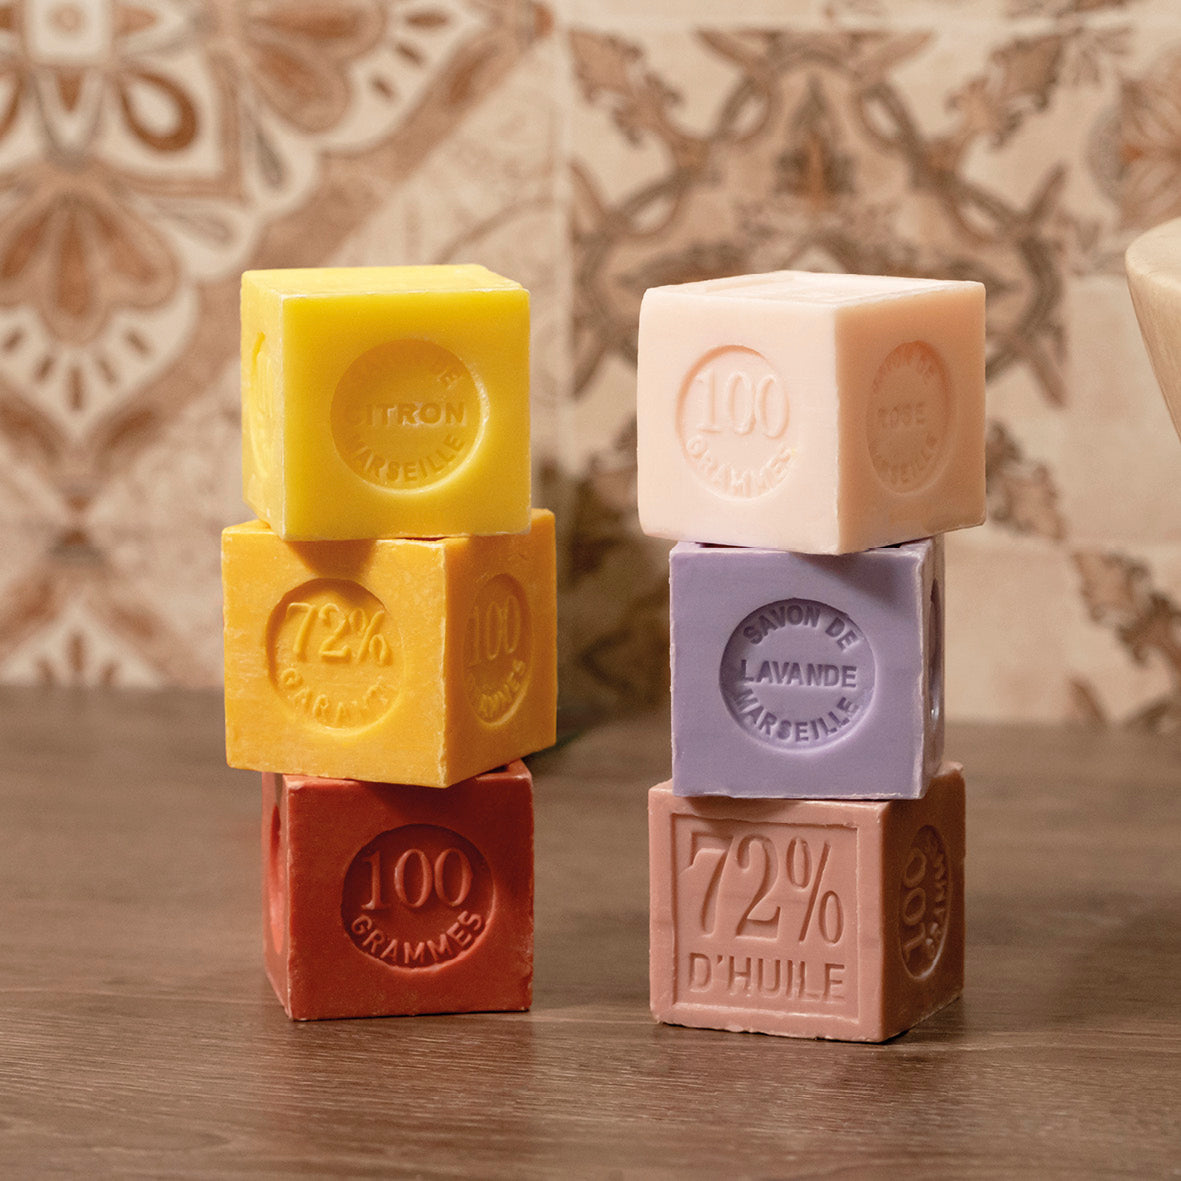 Pack of 6 Marseille soap bars